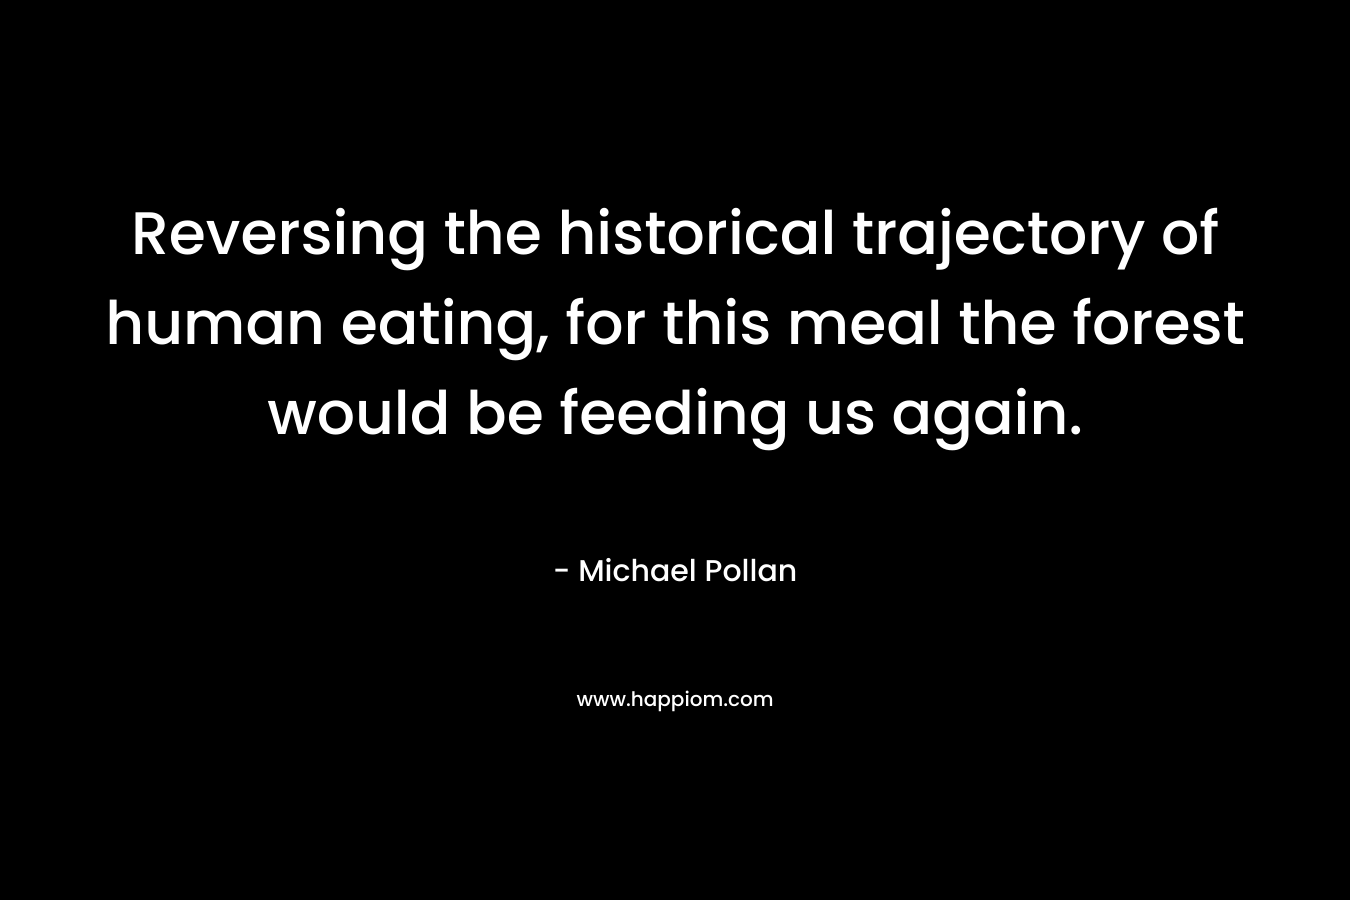 Reversing the historical trajectory of human eating, for this meal the forest would be feeding us again. – Michael Pollan